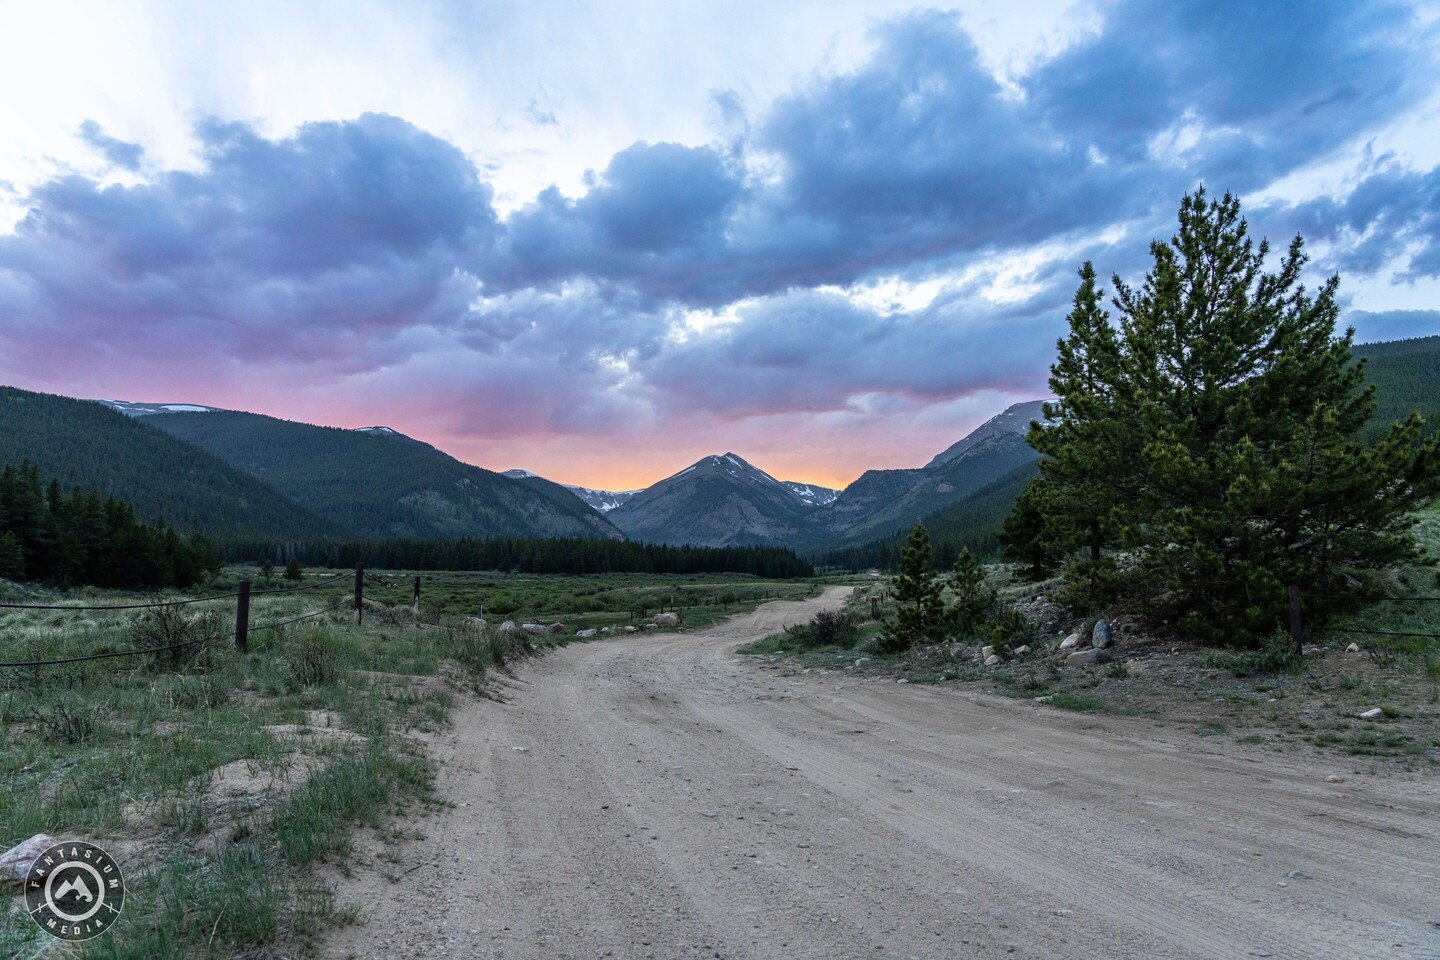 We could use a hand finding higher ground #fantasium #colorado #sunset